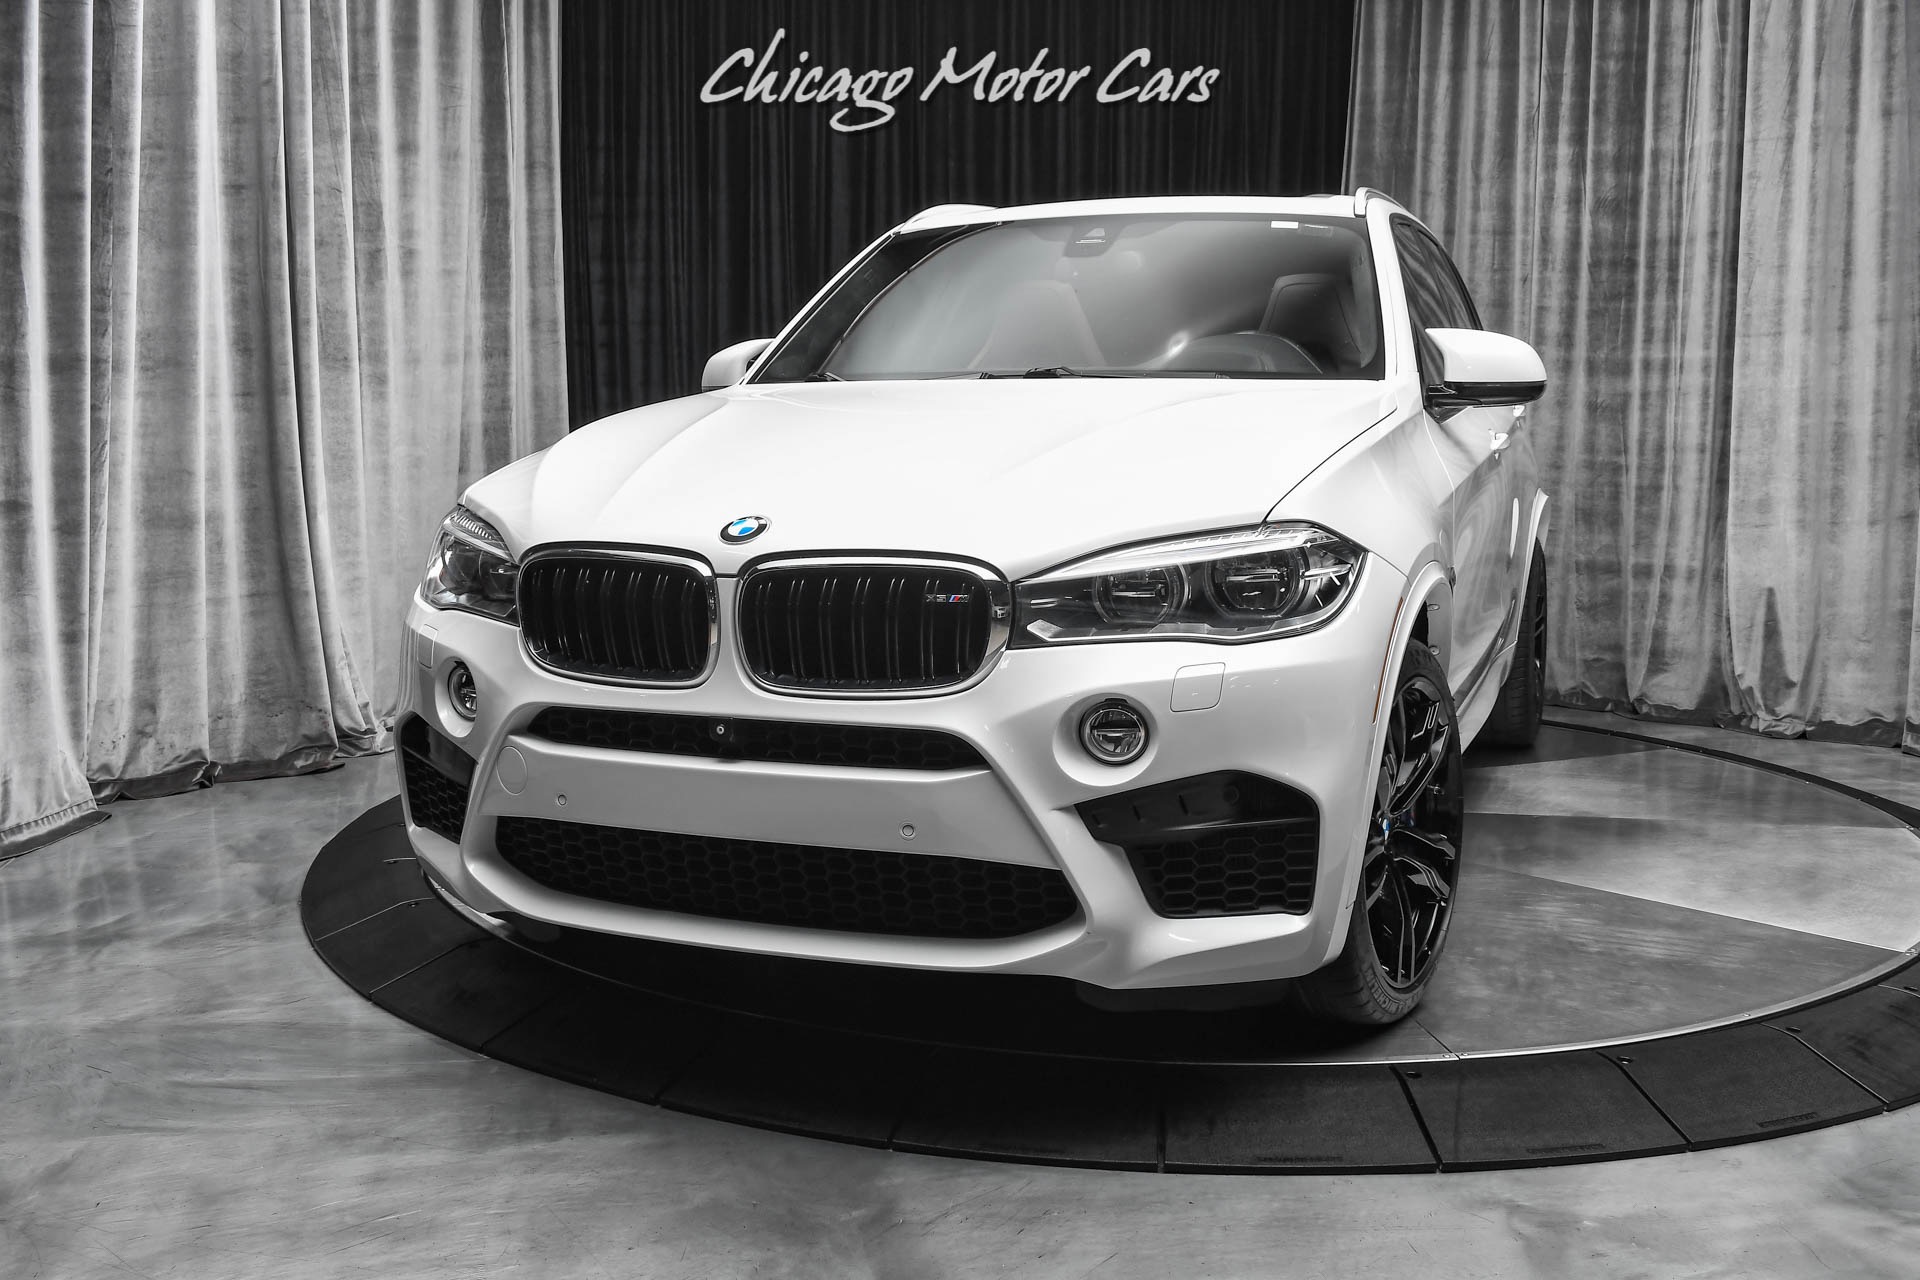 Used 2016 BMW X5M $106k+MSRP! Executive Package! Beige Leather